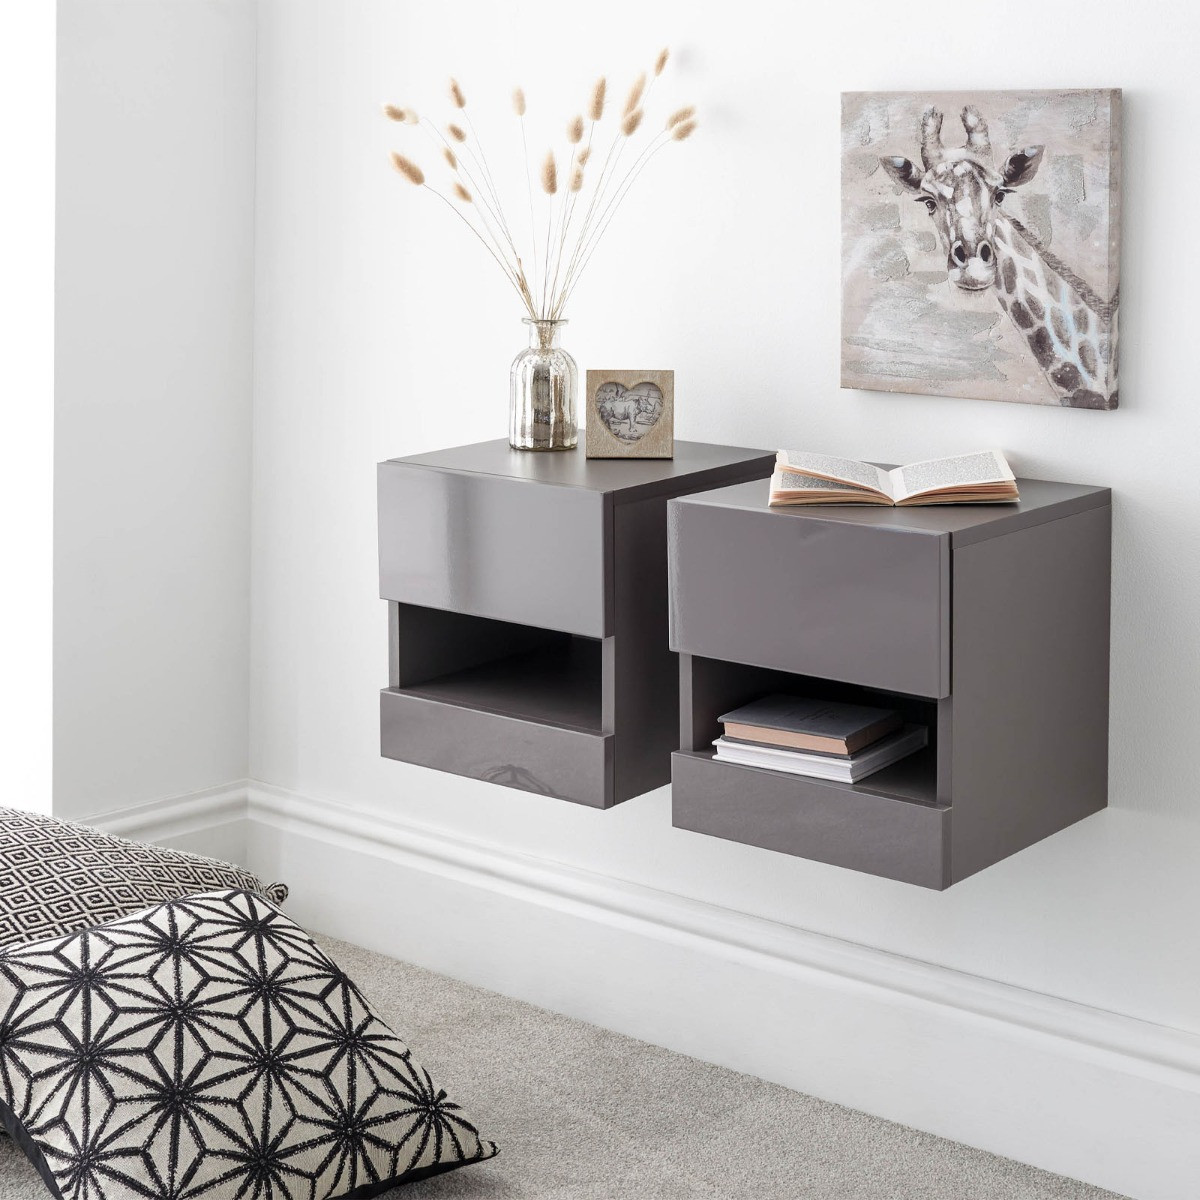 Galicia Pair Of Wall Hanging Bedside Tables - Grey>